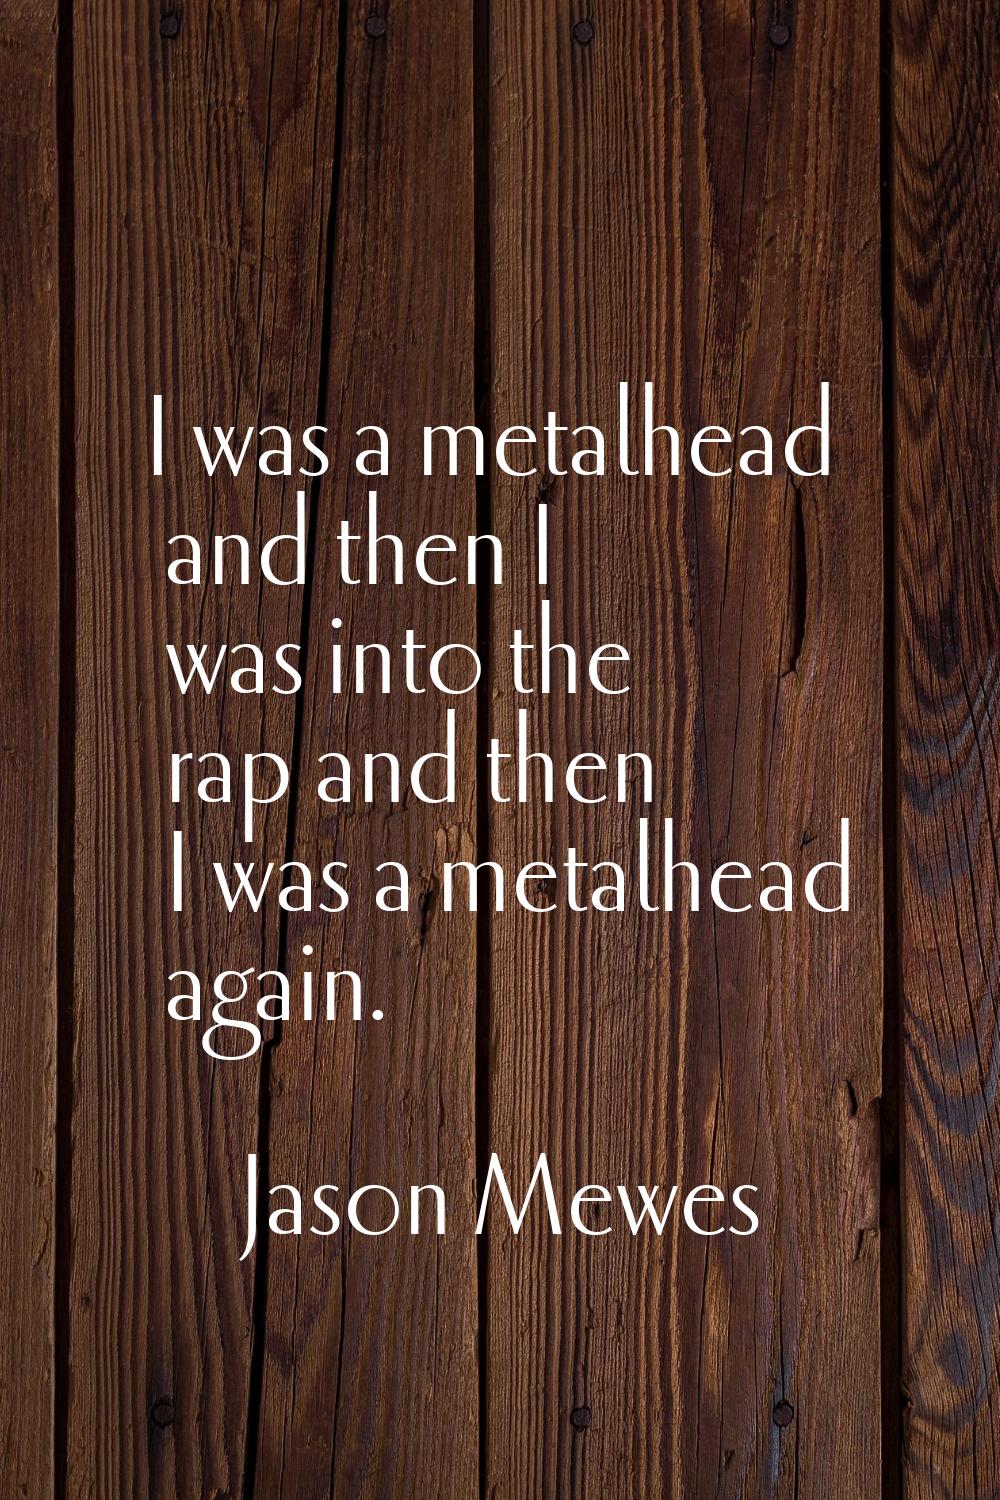 I was a metalhead and then I was into the rap and then I was a metalhead again.